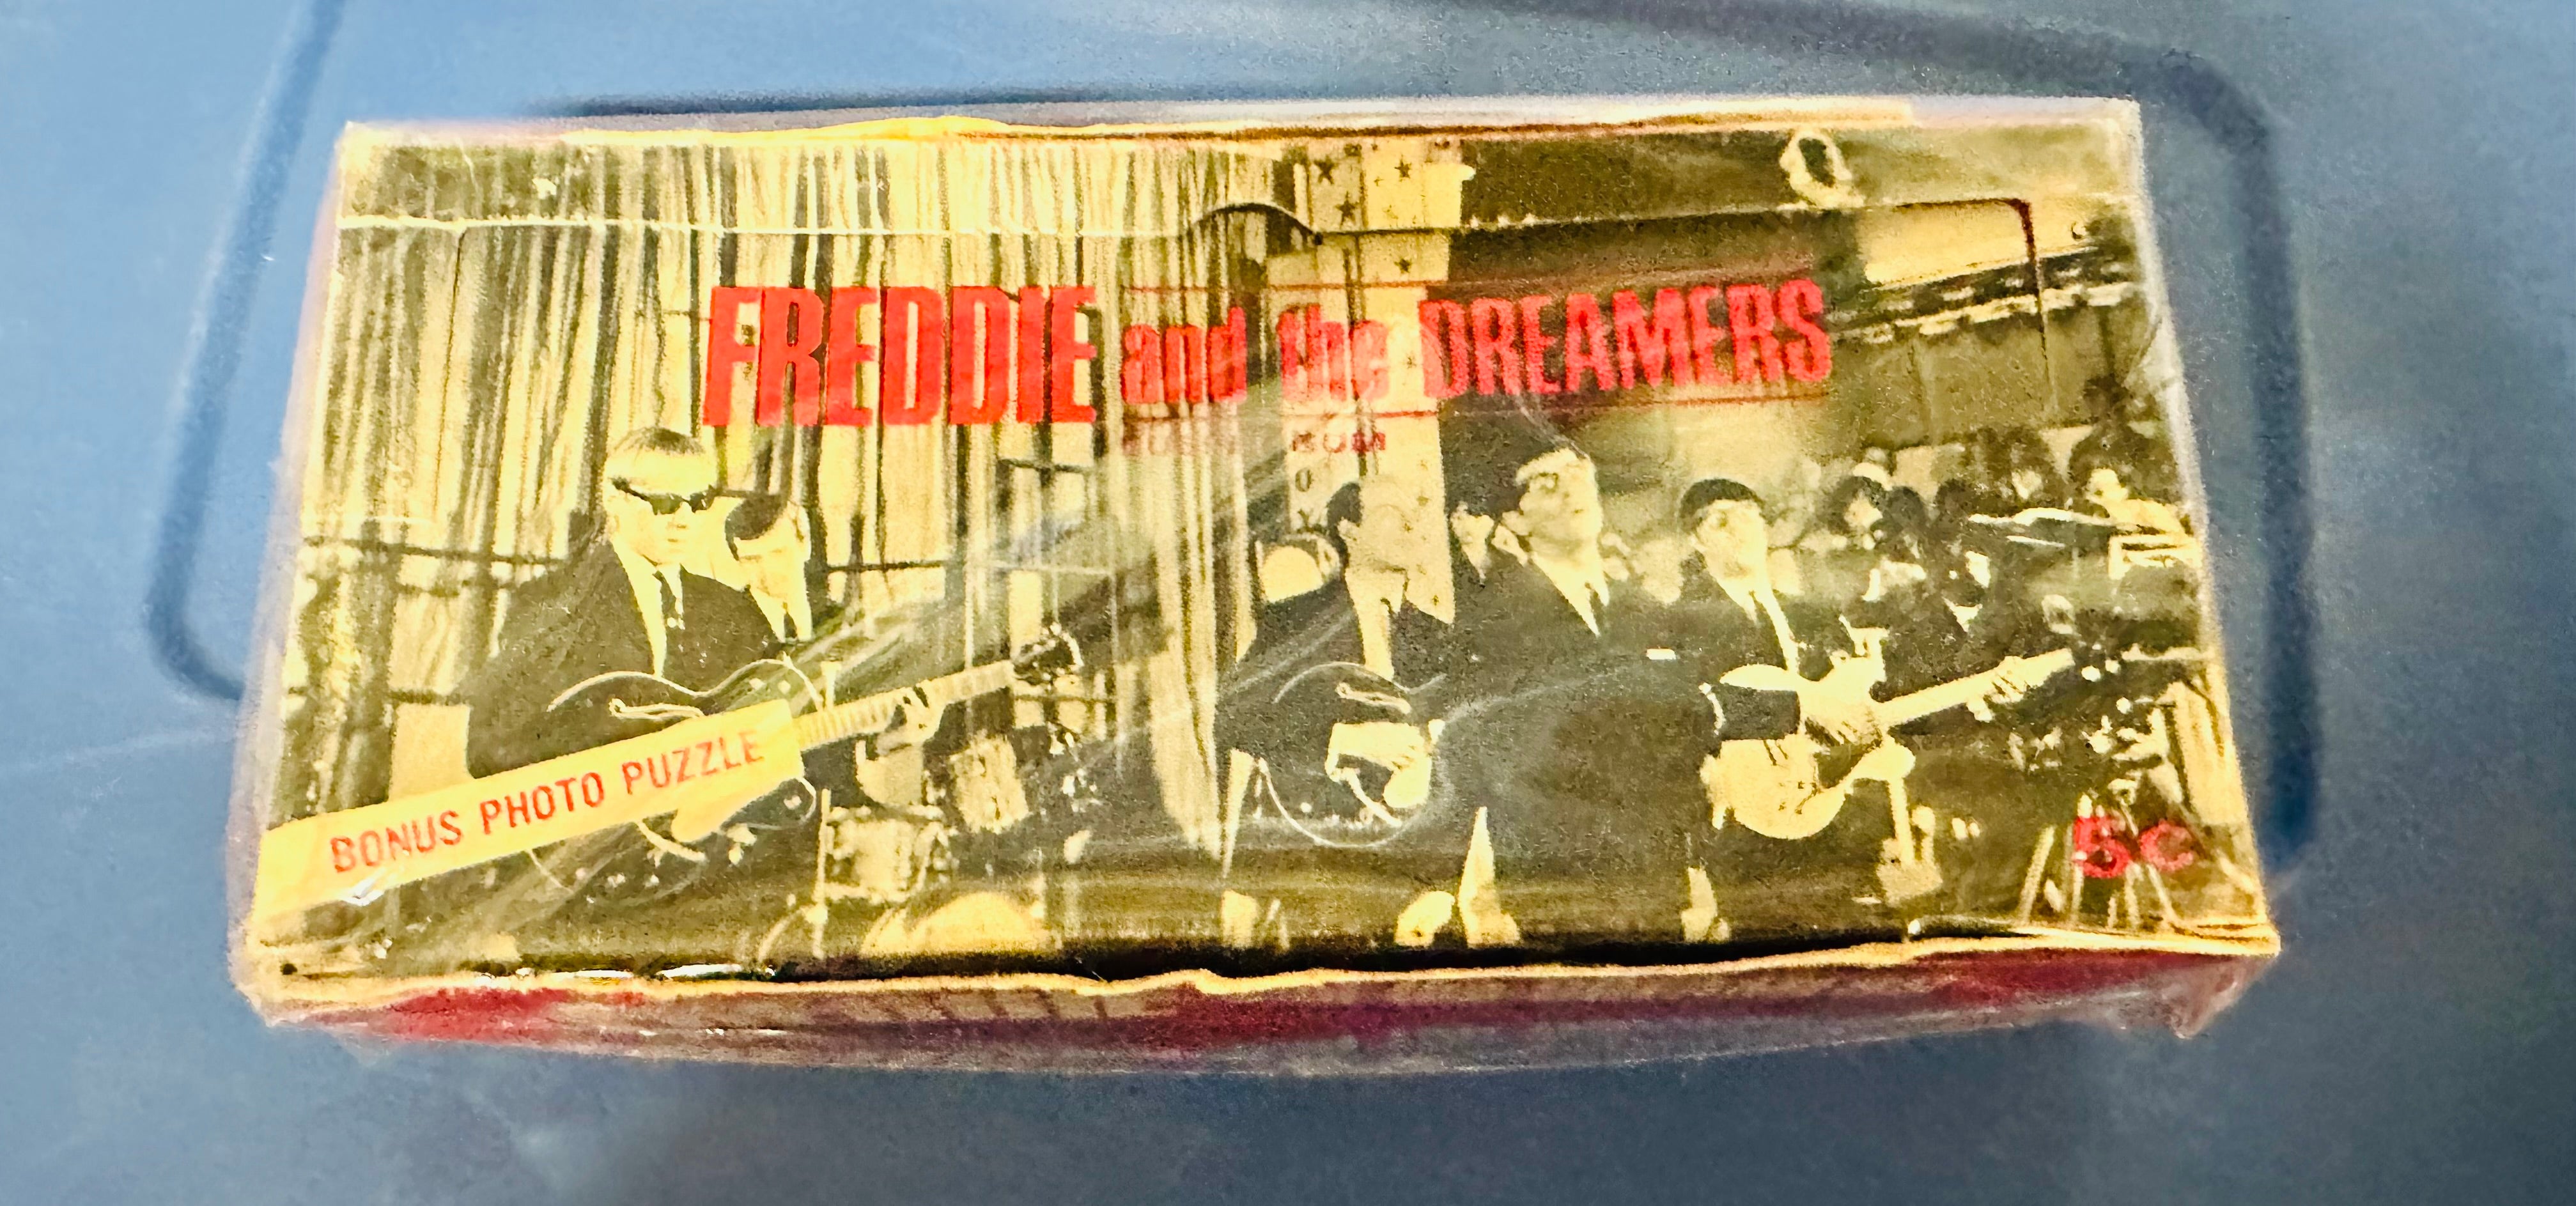 Freddie and the dreamers empty display box, 1958